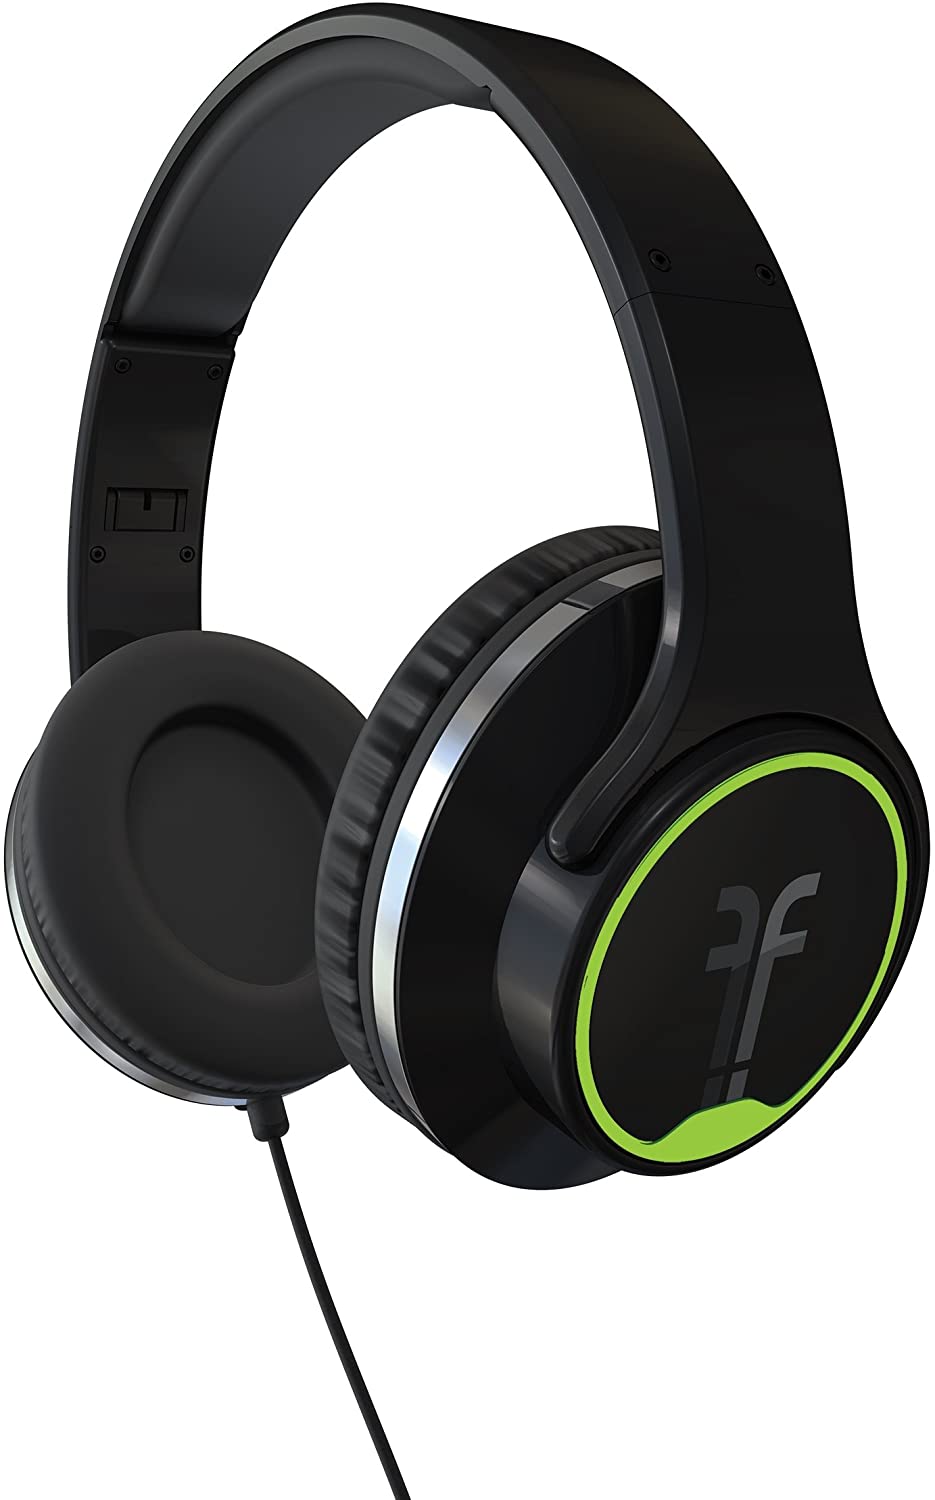 ''Flips Audio FH2814BK Collapsible HD Headphones and Stereo SPEAKERS, Black''